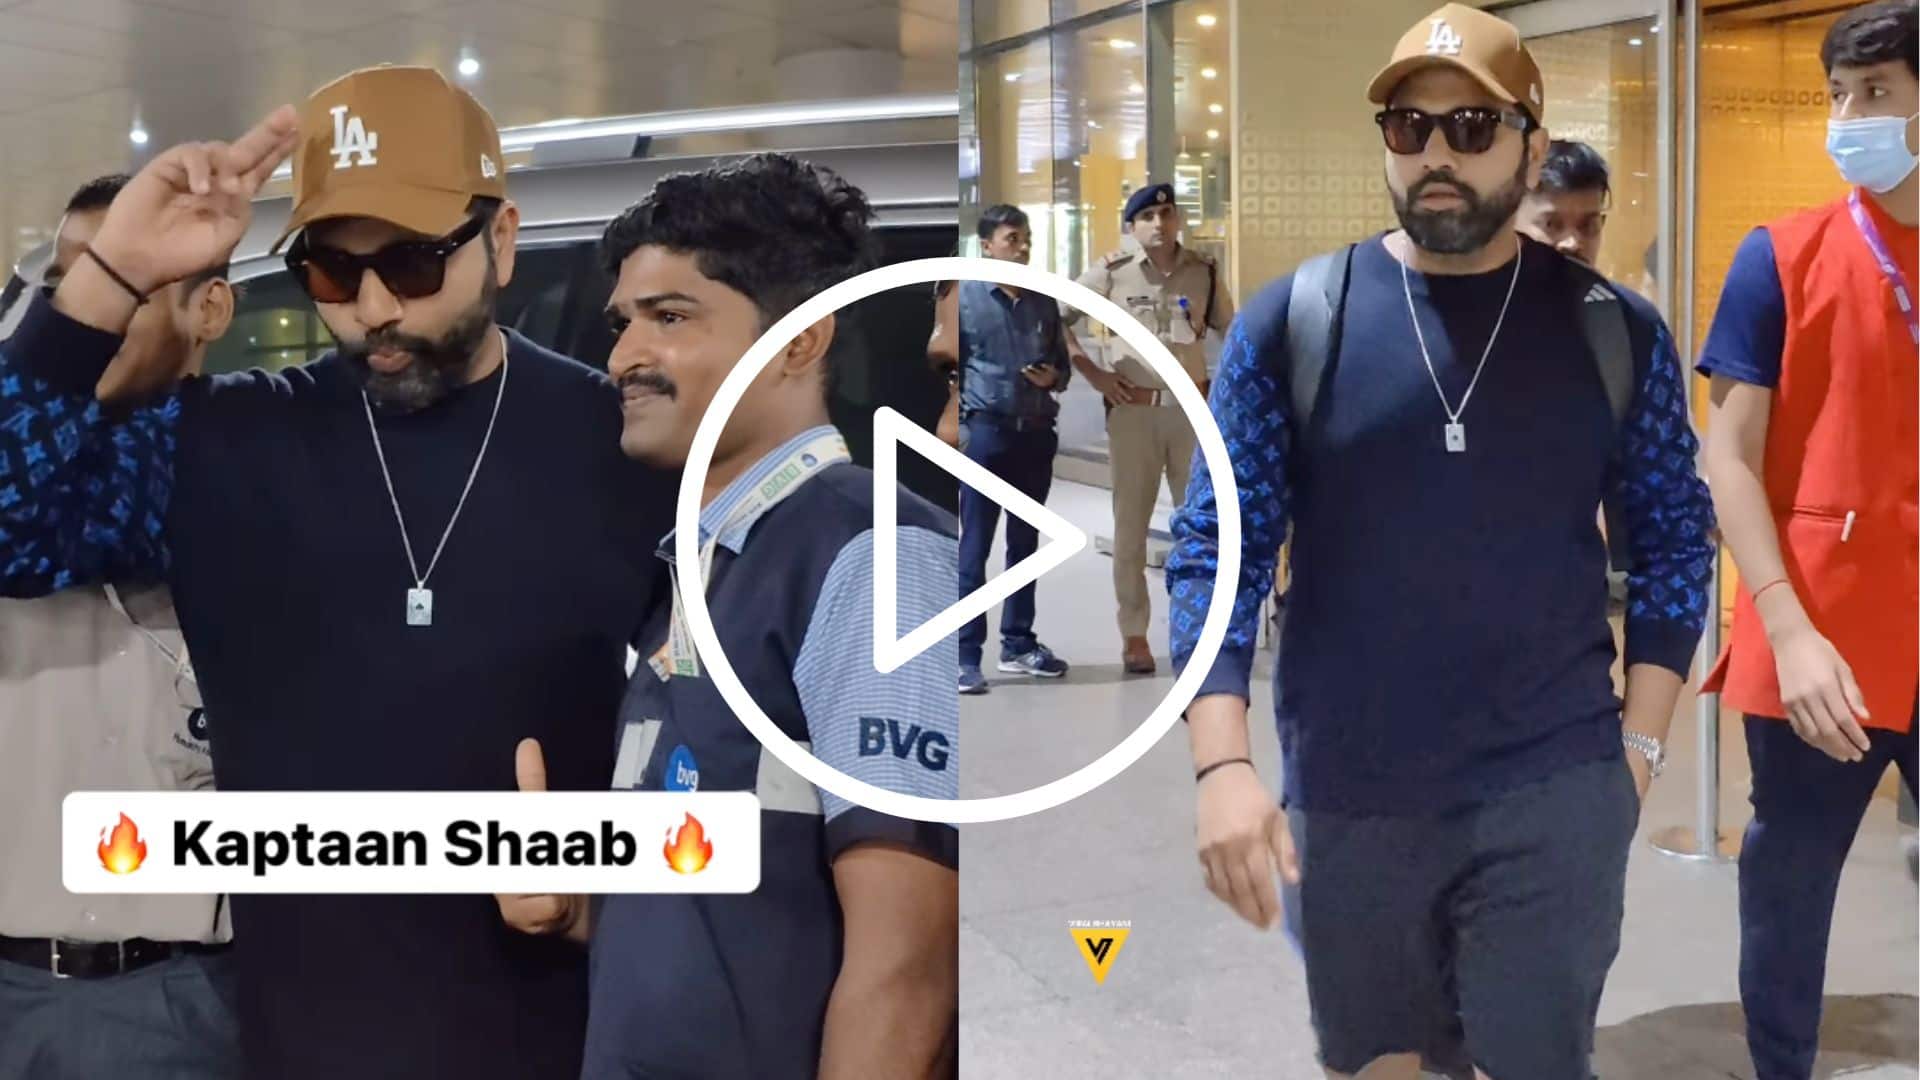 [Watch] Rohit Sharma's 'Swag' Pose With Airport Crew While Returning From South Africa